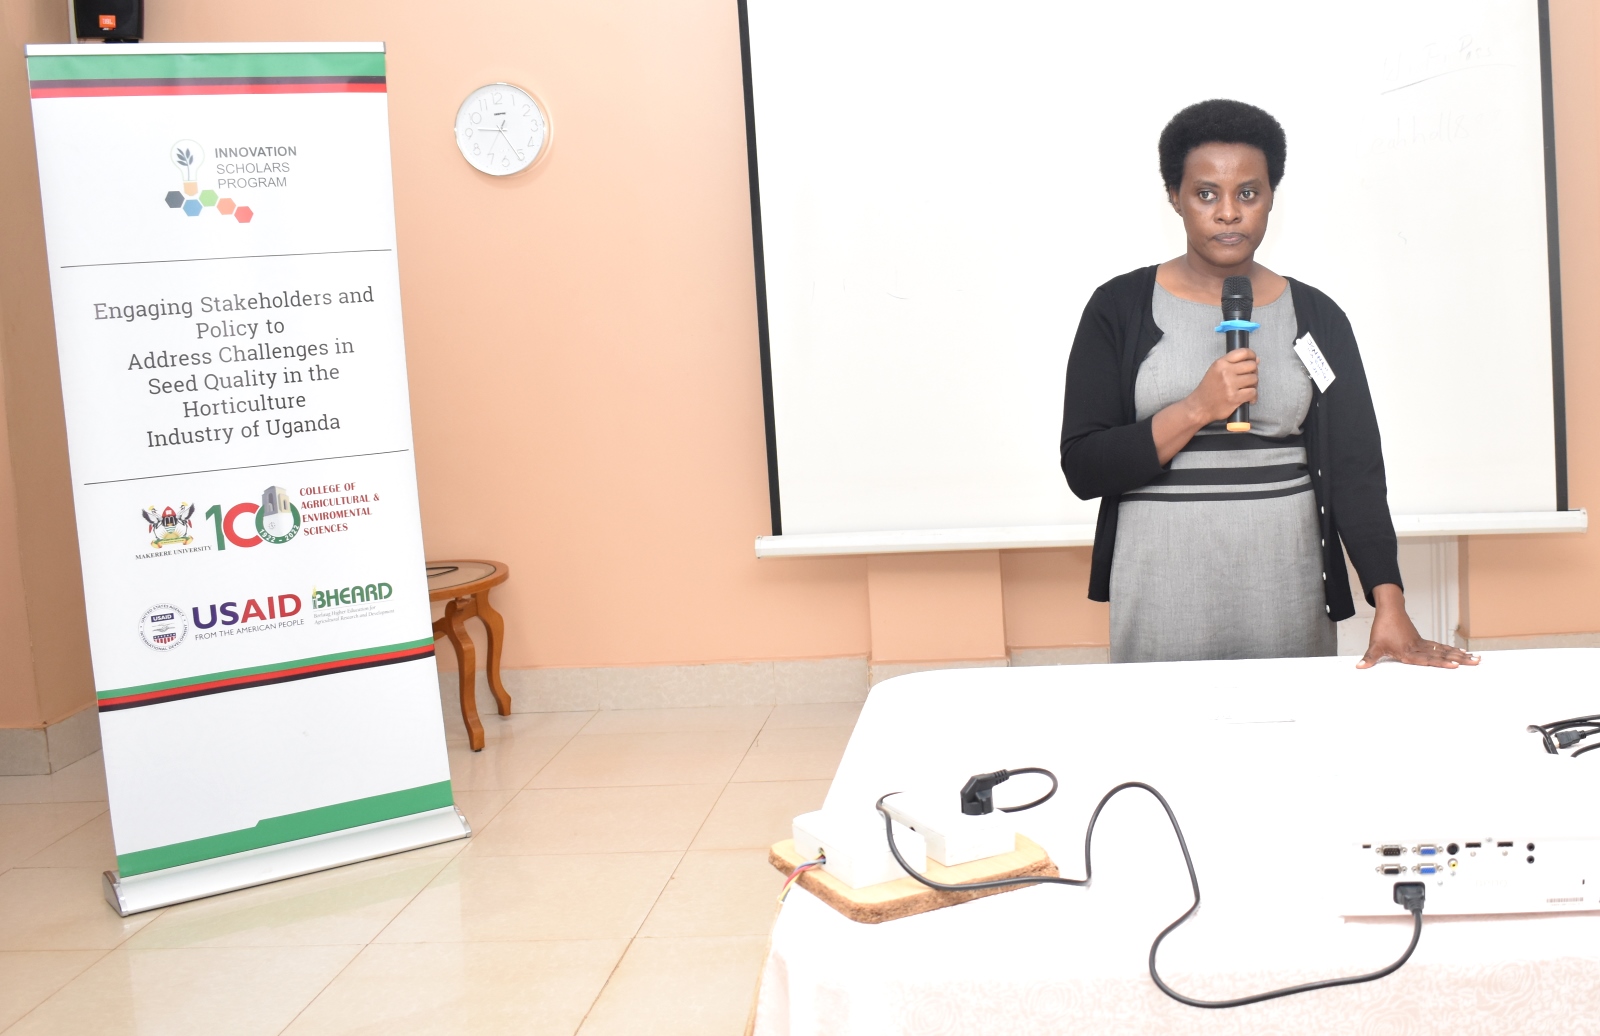 Dr. Jeninah Karungi, Associate Professor in the Department of Agricultural Production at CAES, Makerere University sharing an overview of the project at the Stakeholder Engagement on Challenges Affecting the Seed Value Chain in the Horticulture Industry in Uganda, 13th July 2022, Kampala.